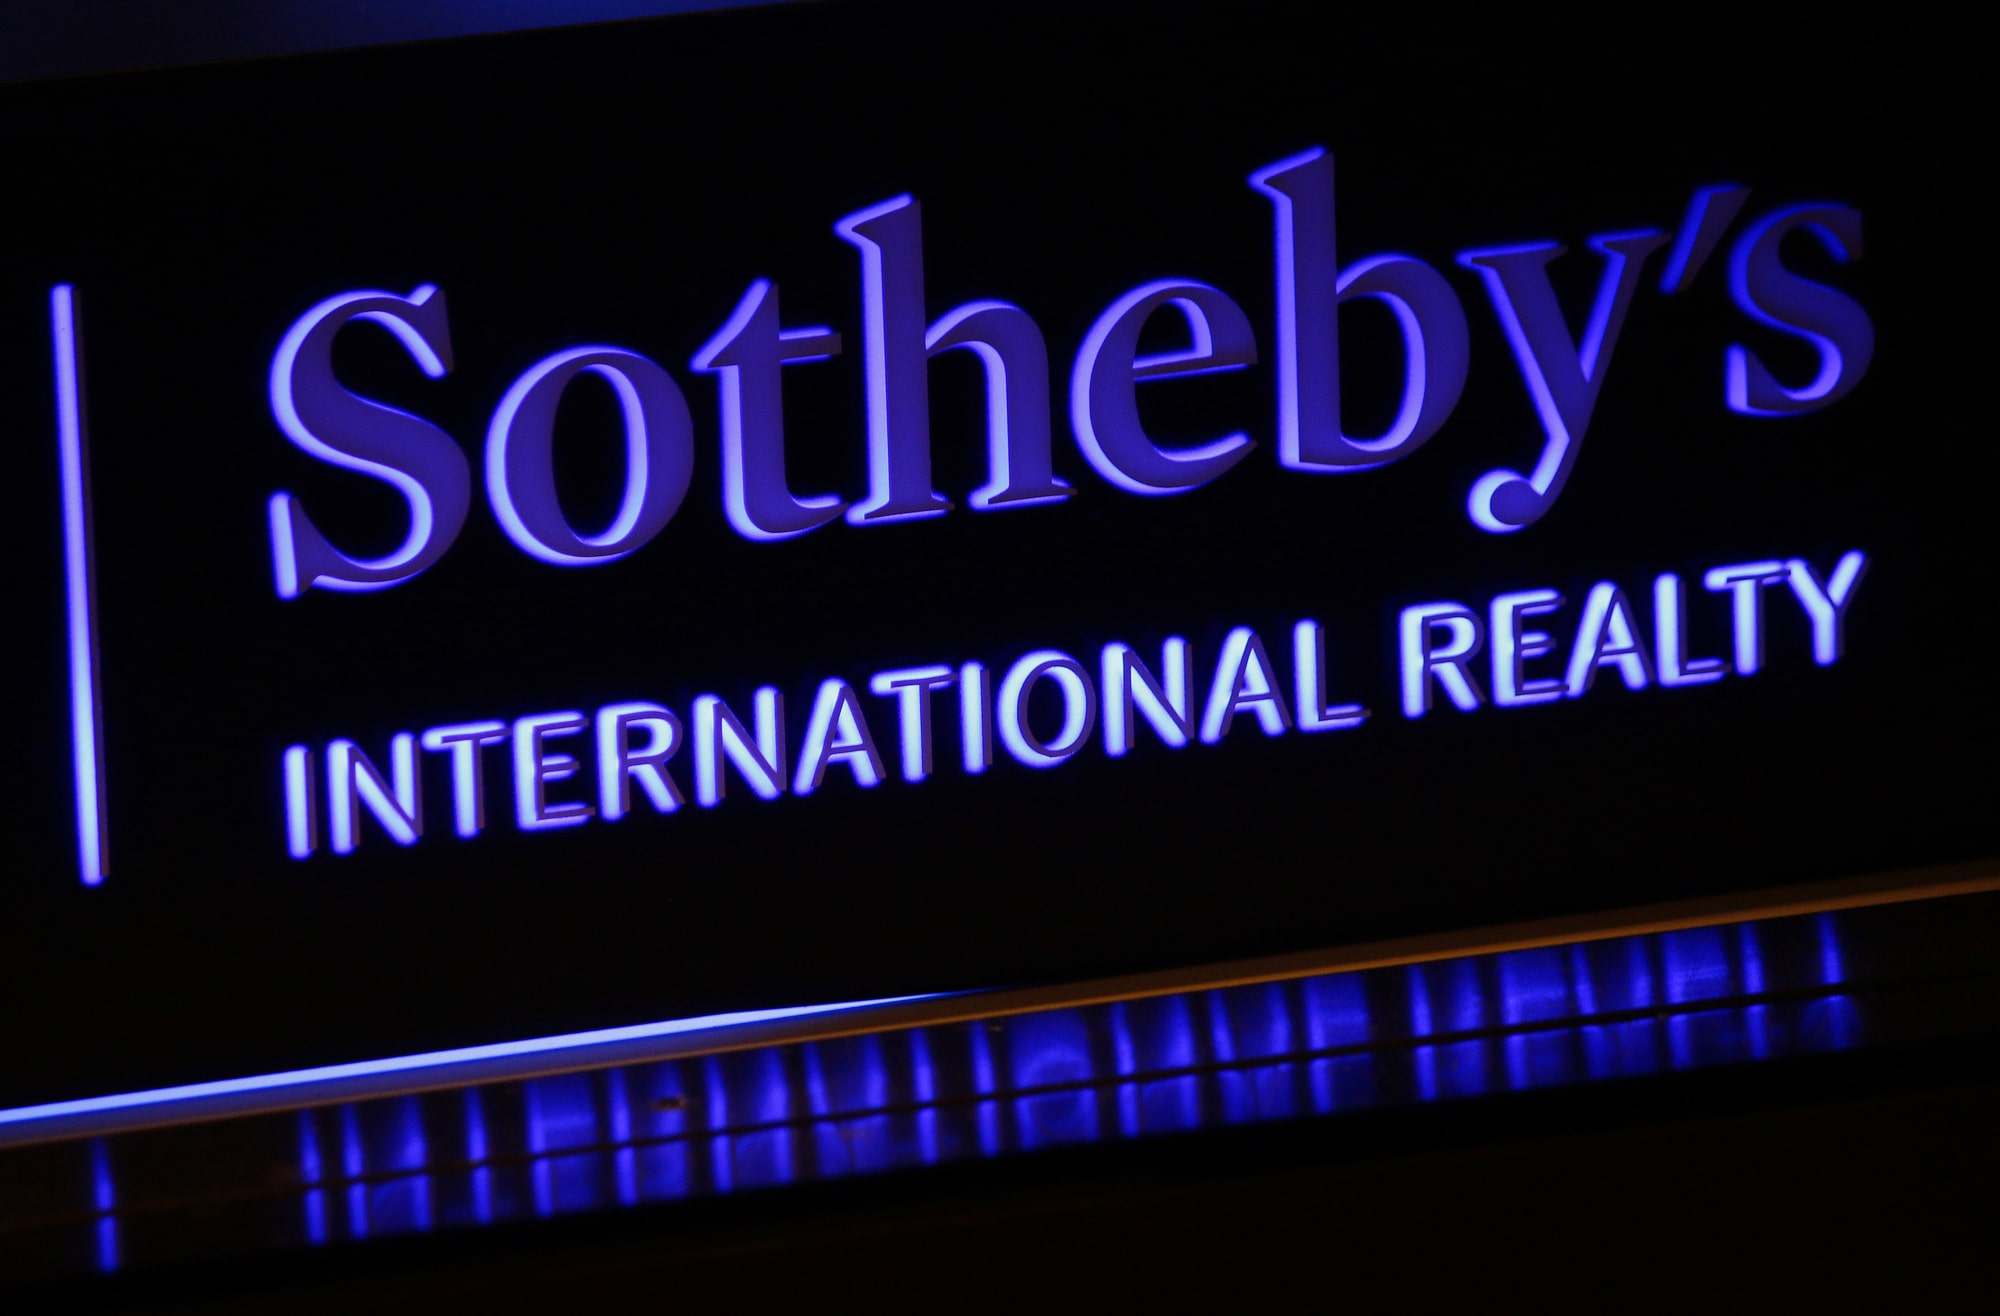 Sotheby’s sold a Cryptopunk NFT for $11.8 million